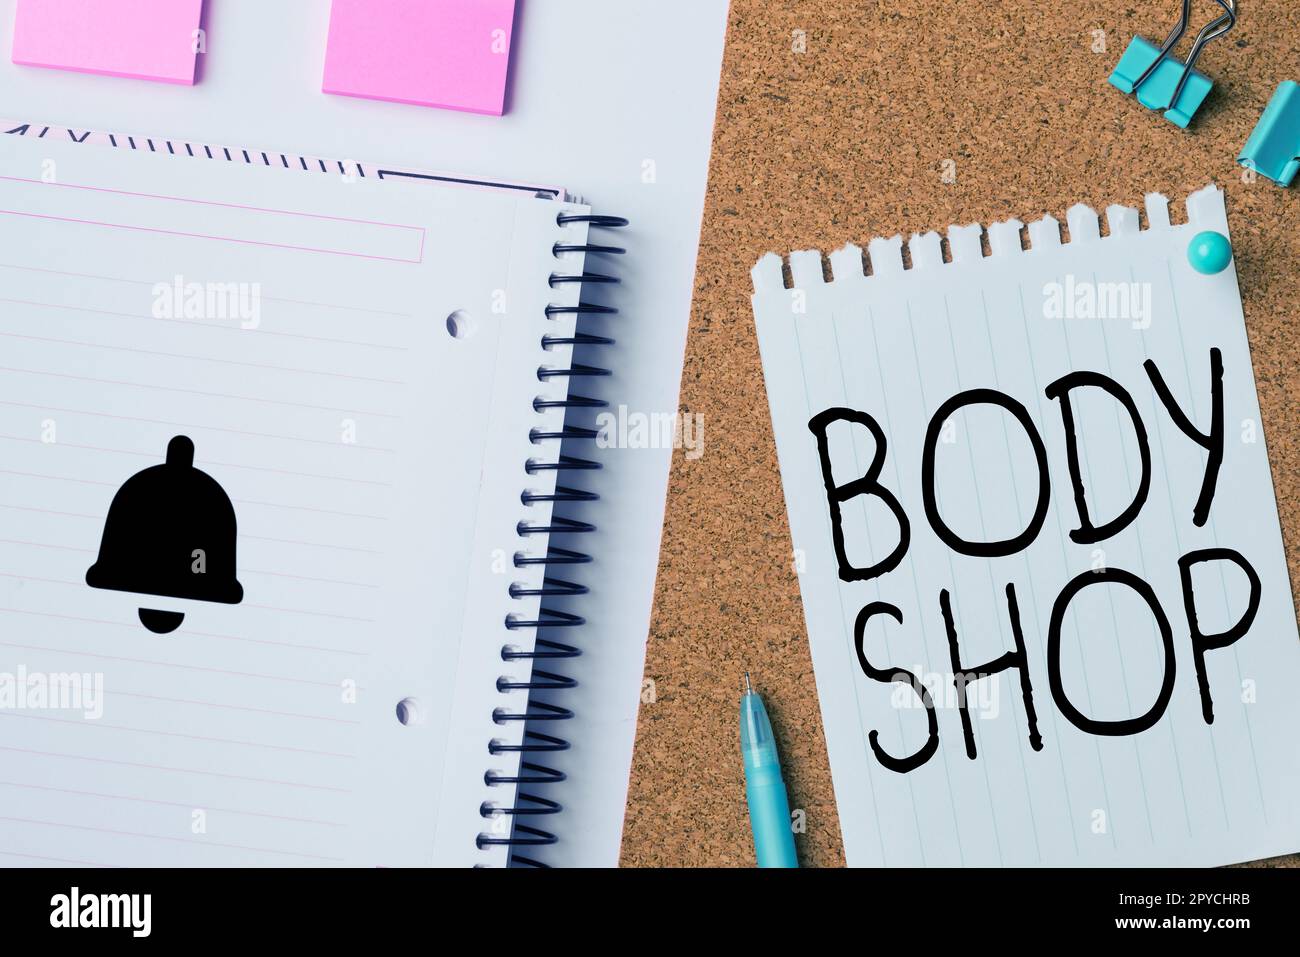 Inspiration showing sign Body Shop. Business showcase a shop where automotive bodies are made or repaired Stock Photo